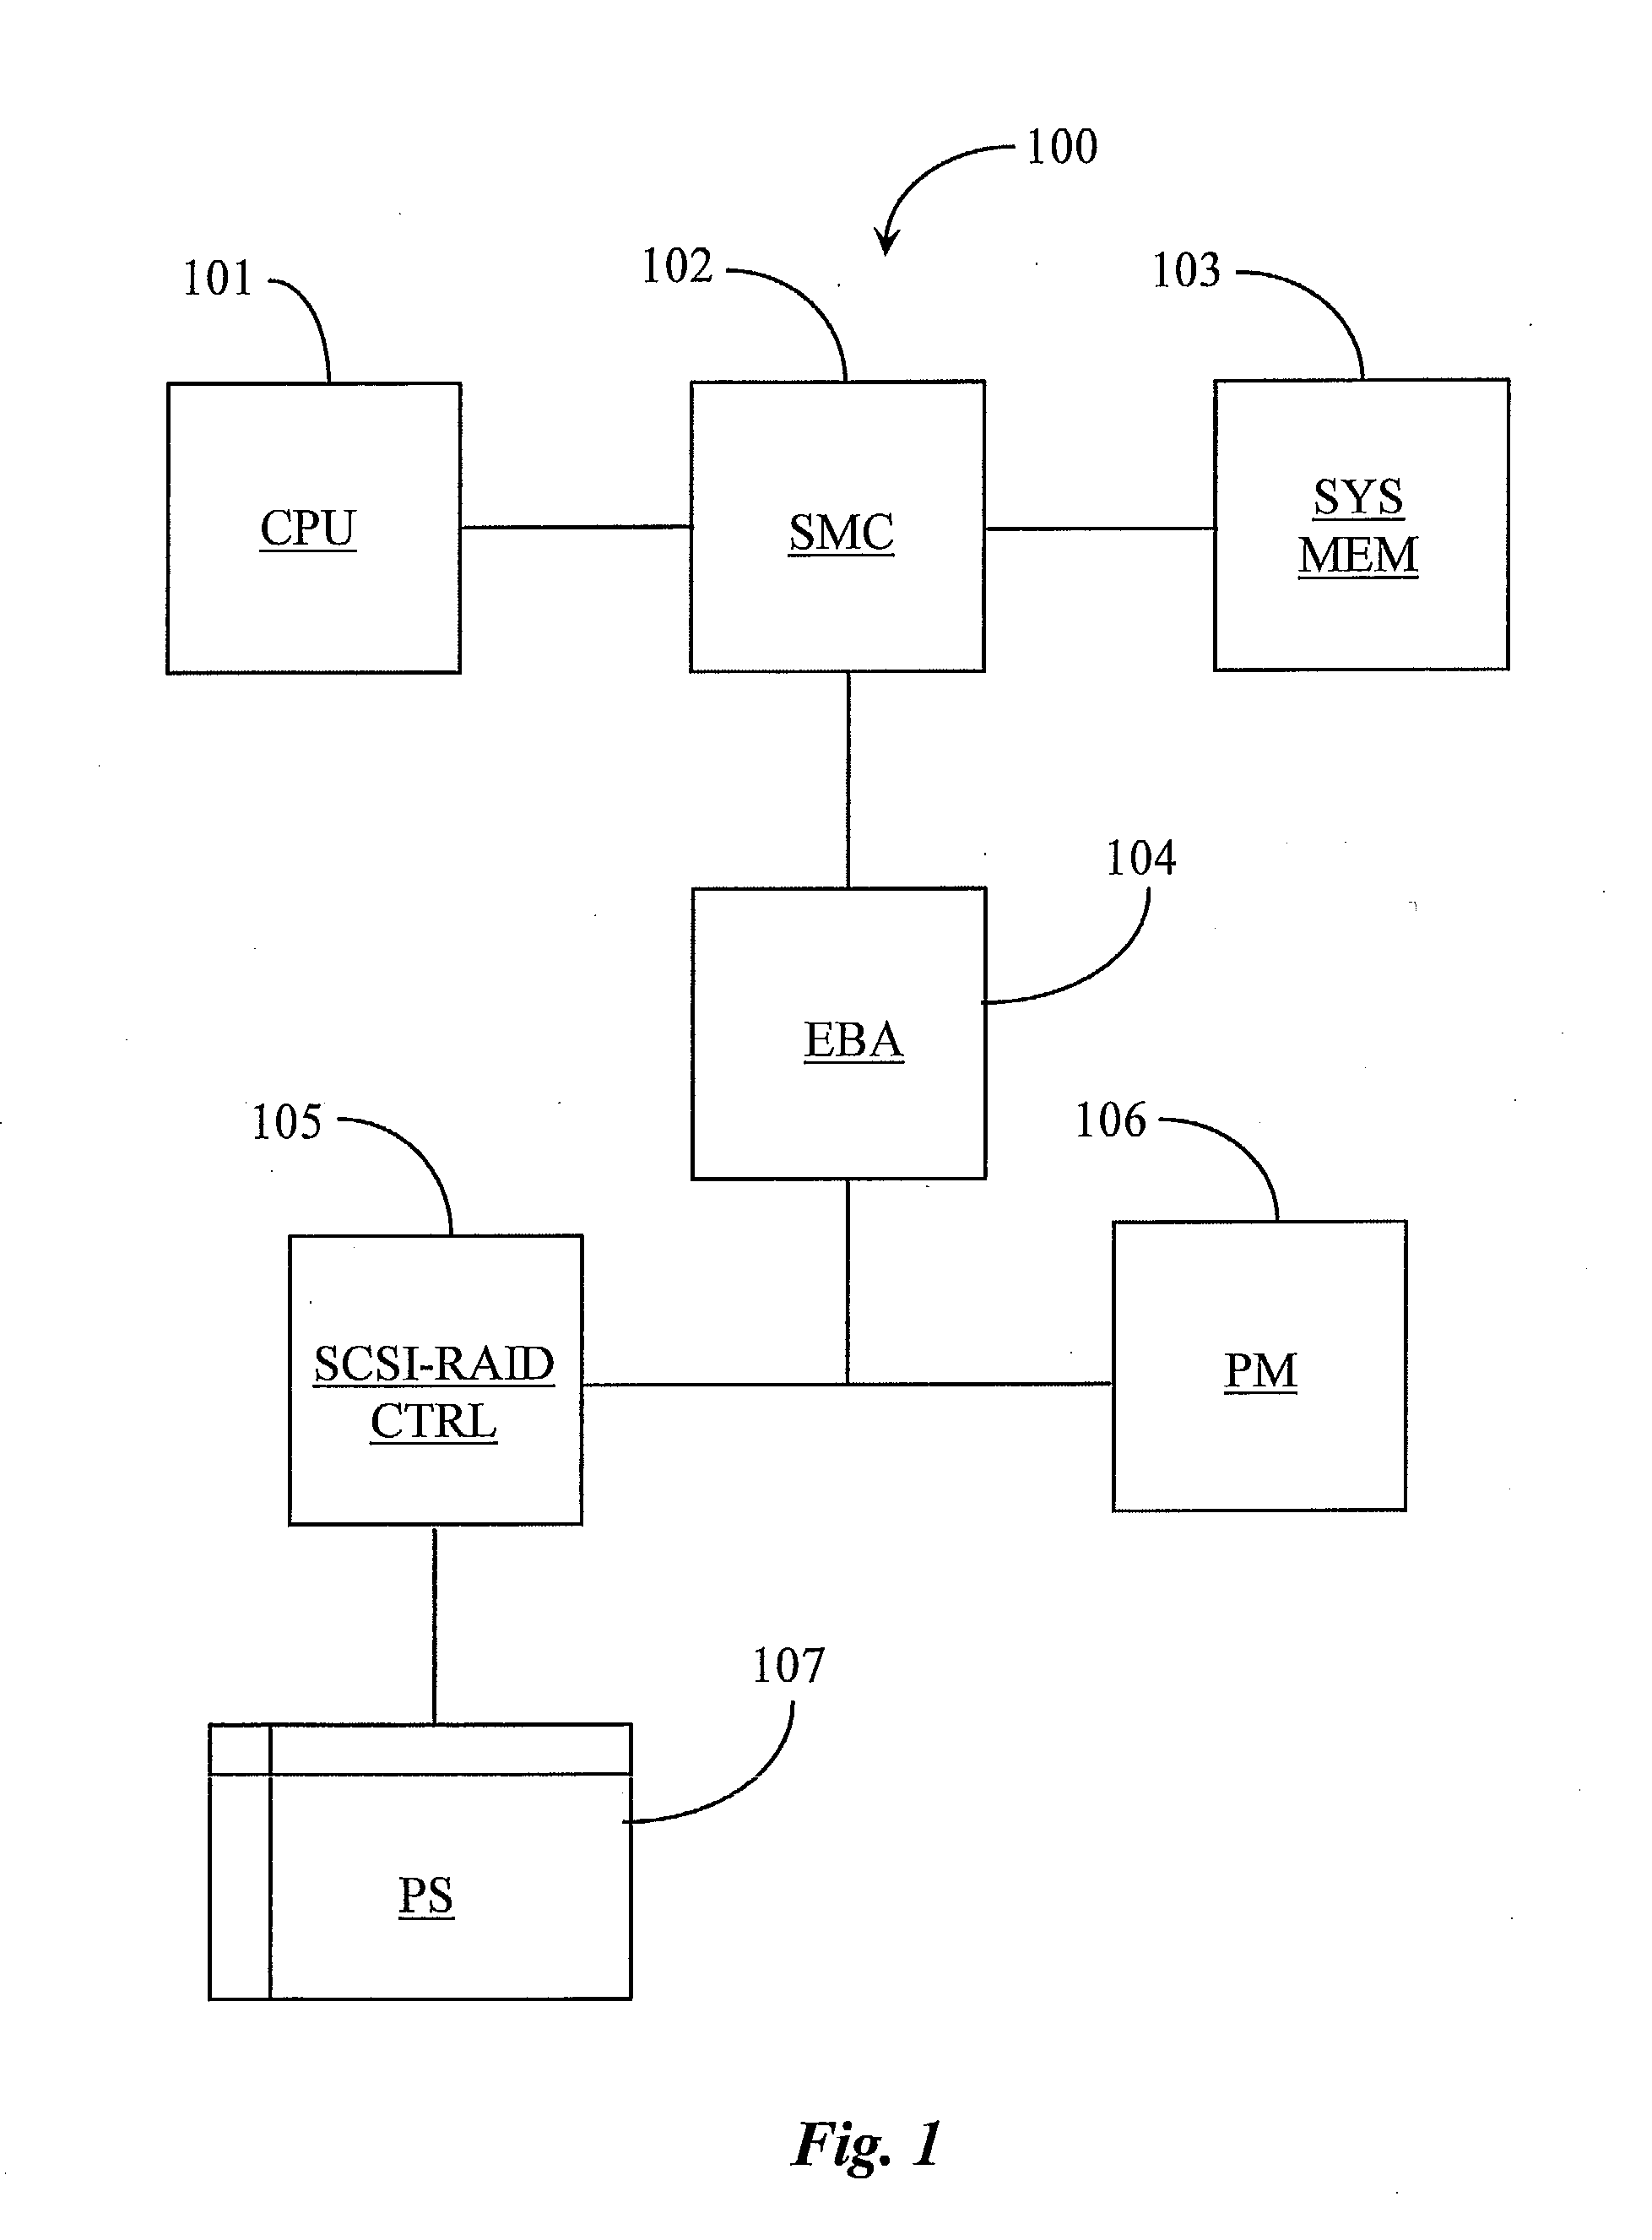 System for Enabling Secure and Automatic Data Backup and Instant Recovery